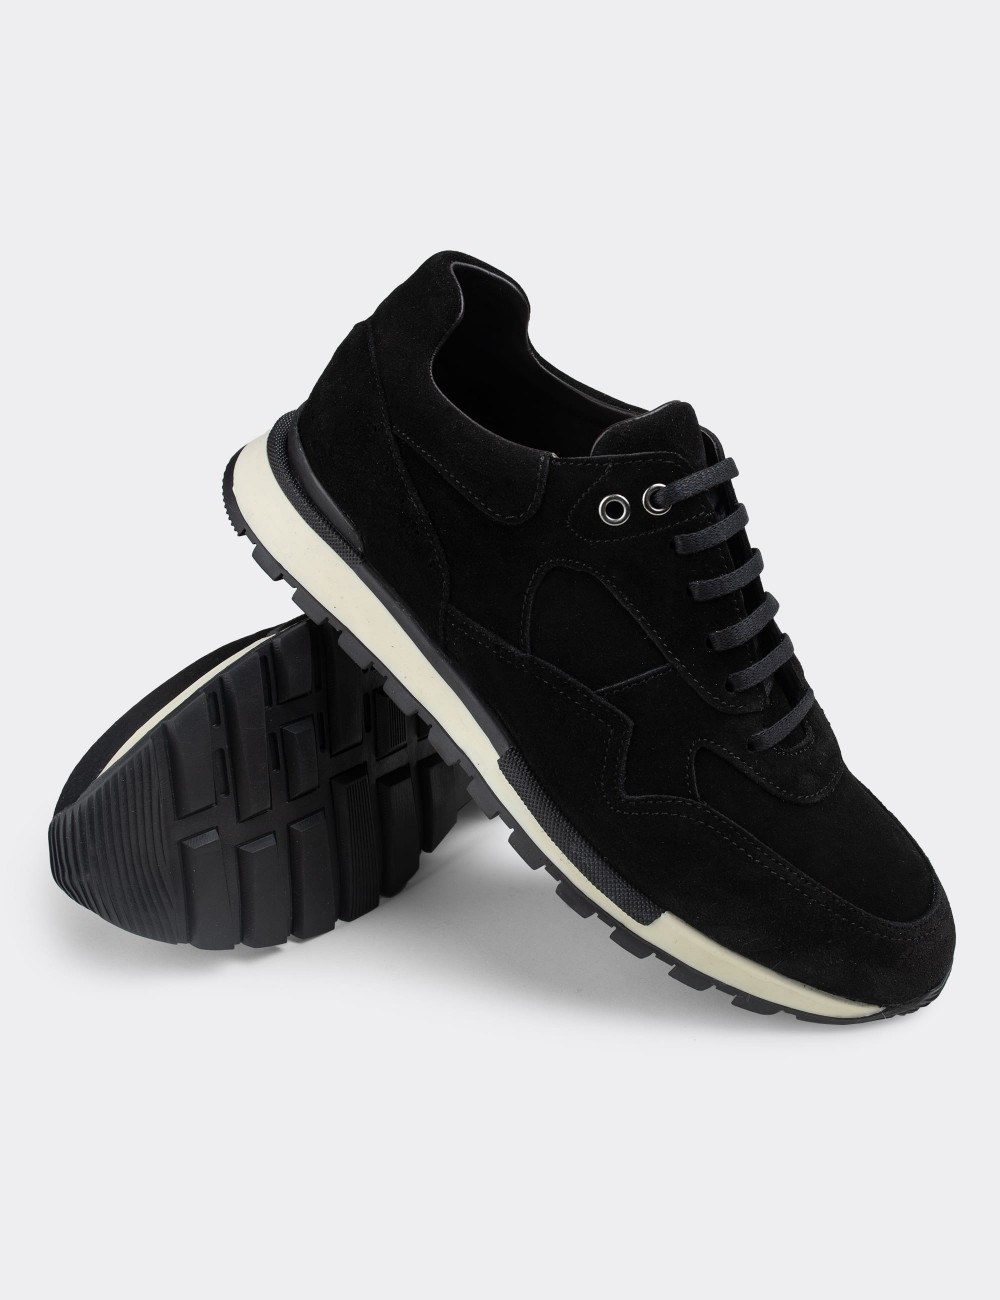 Black Suede Leather Sneakers - 01818MSYHT01